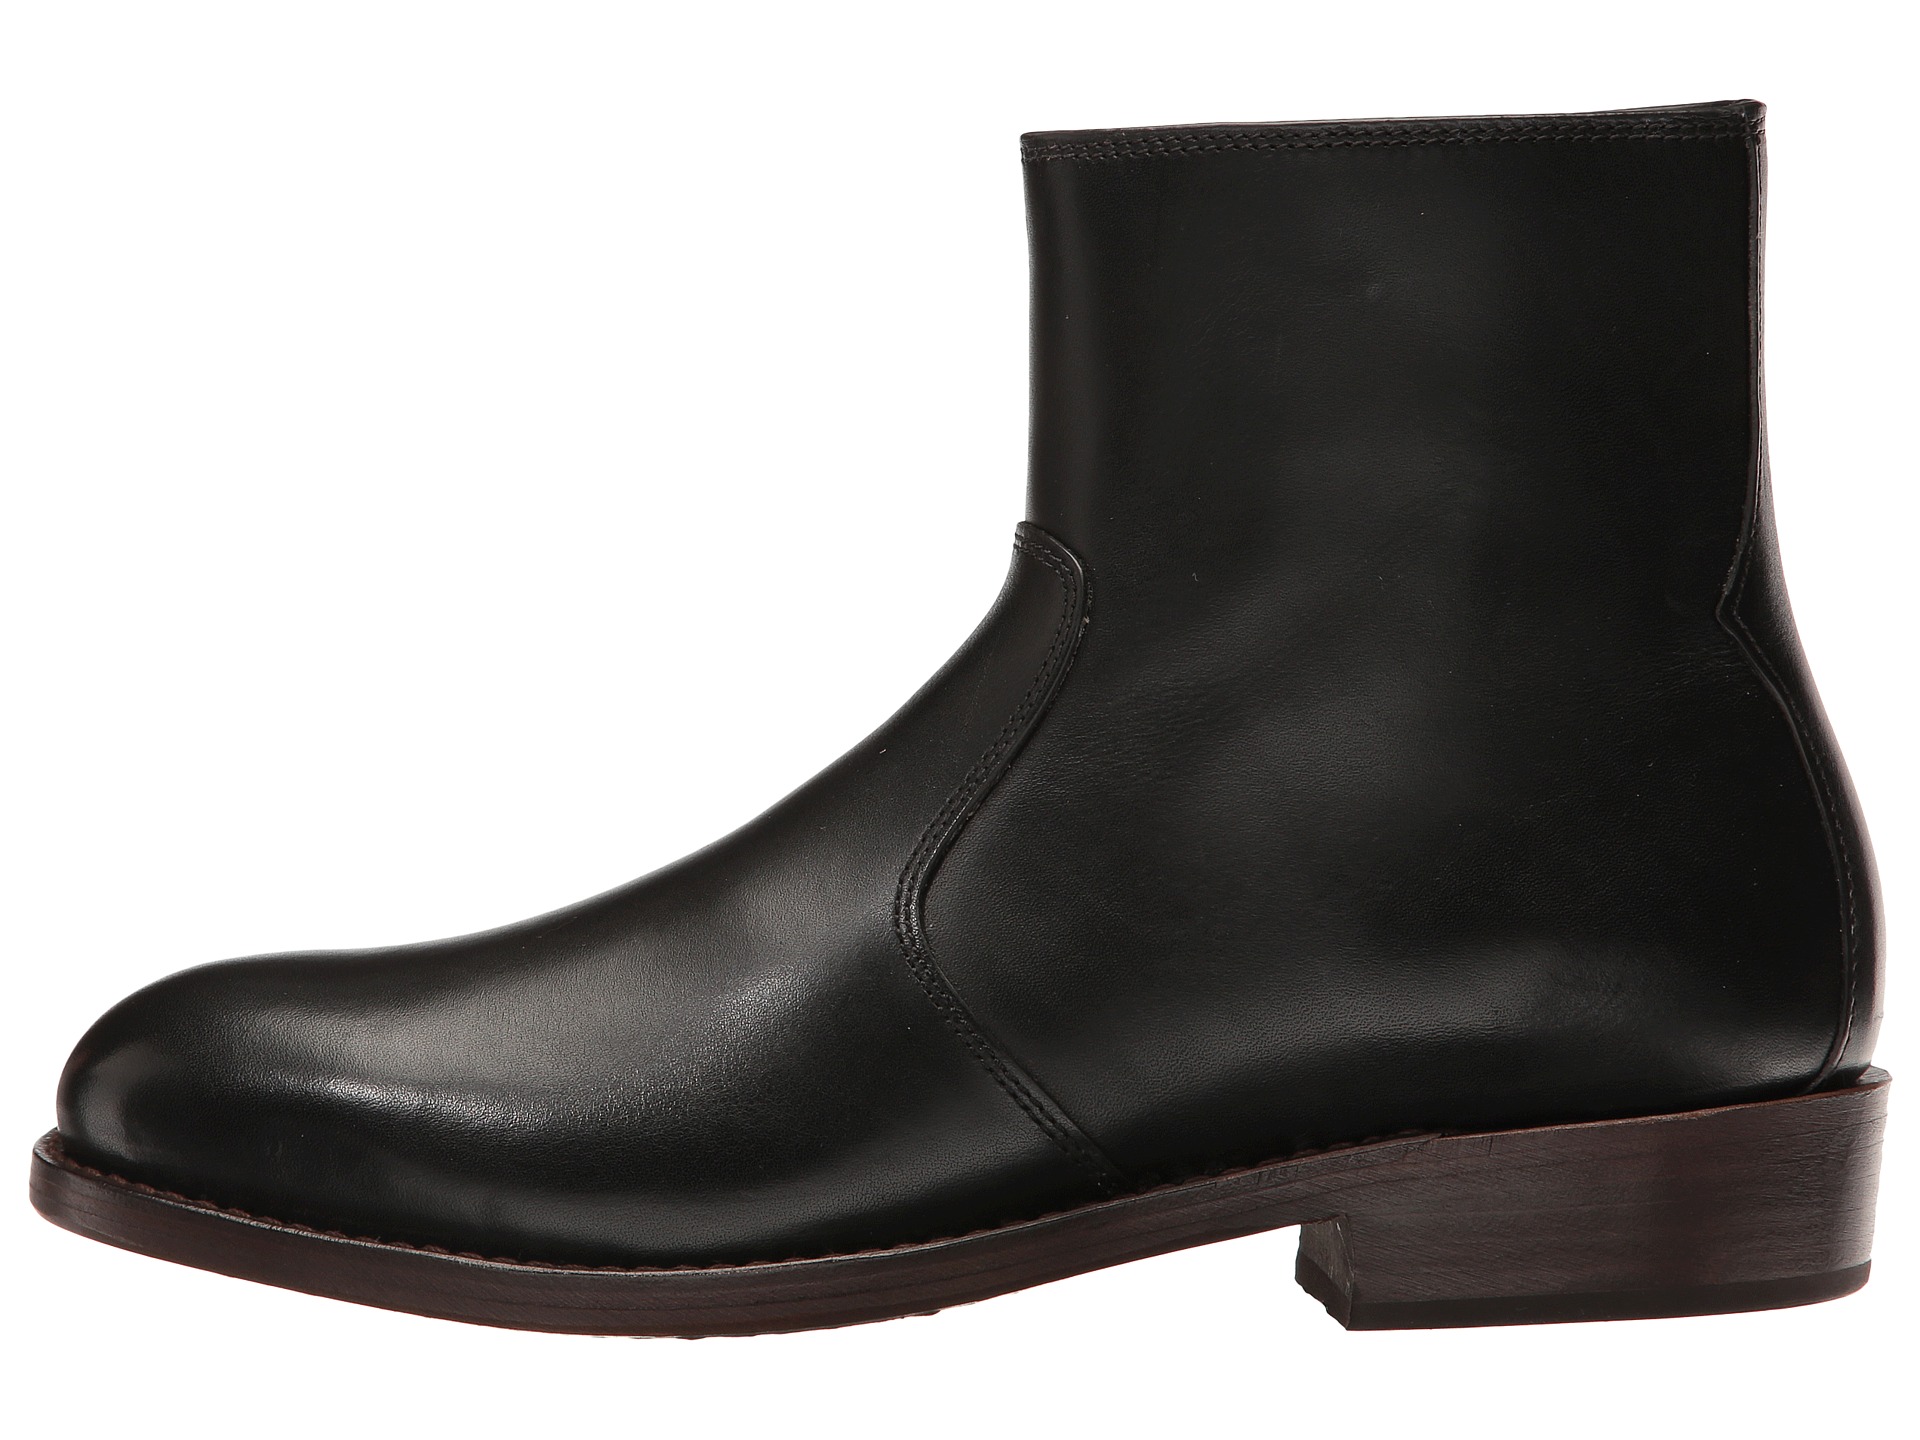 COACH West Leather Zip Boot at Zappos.com